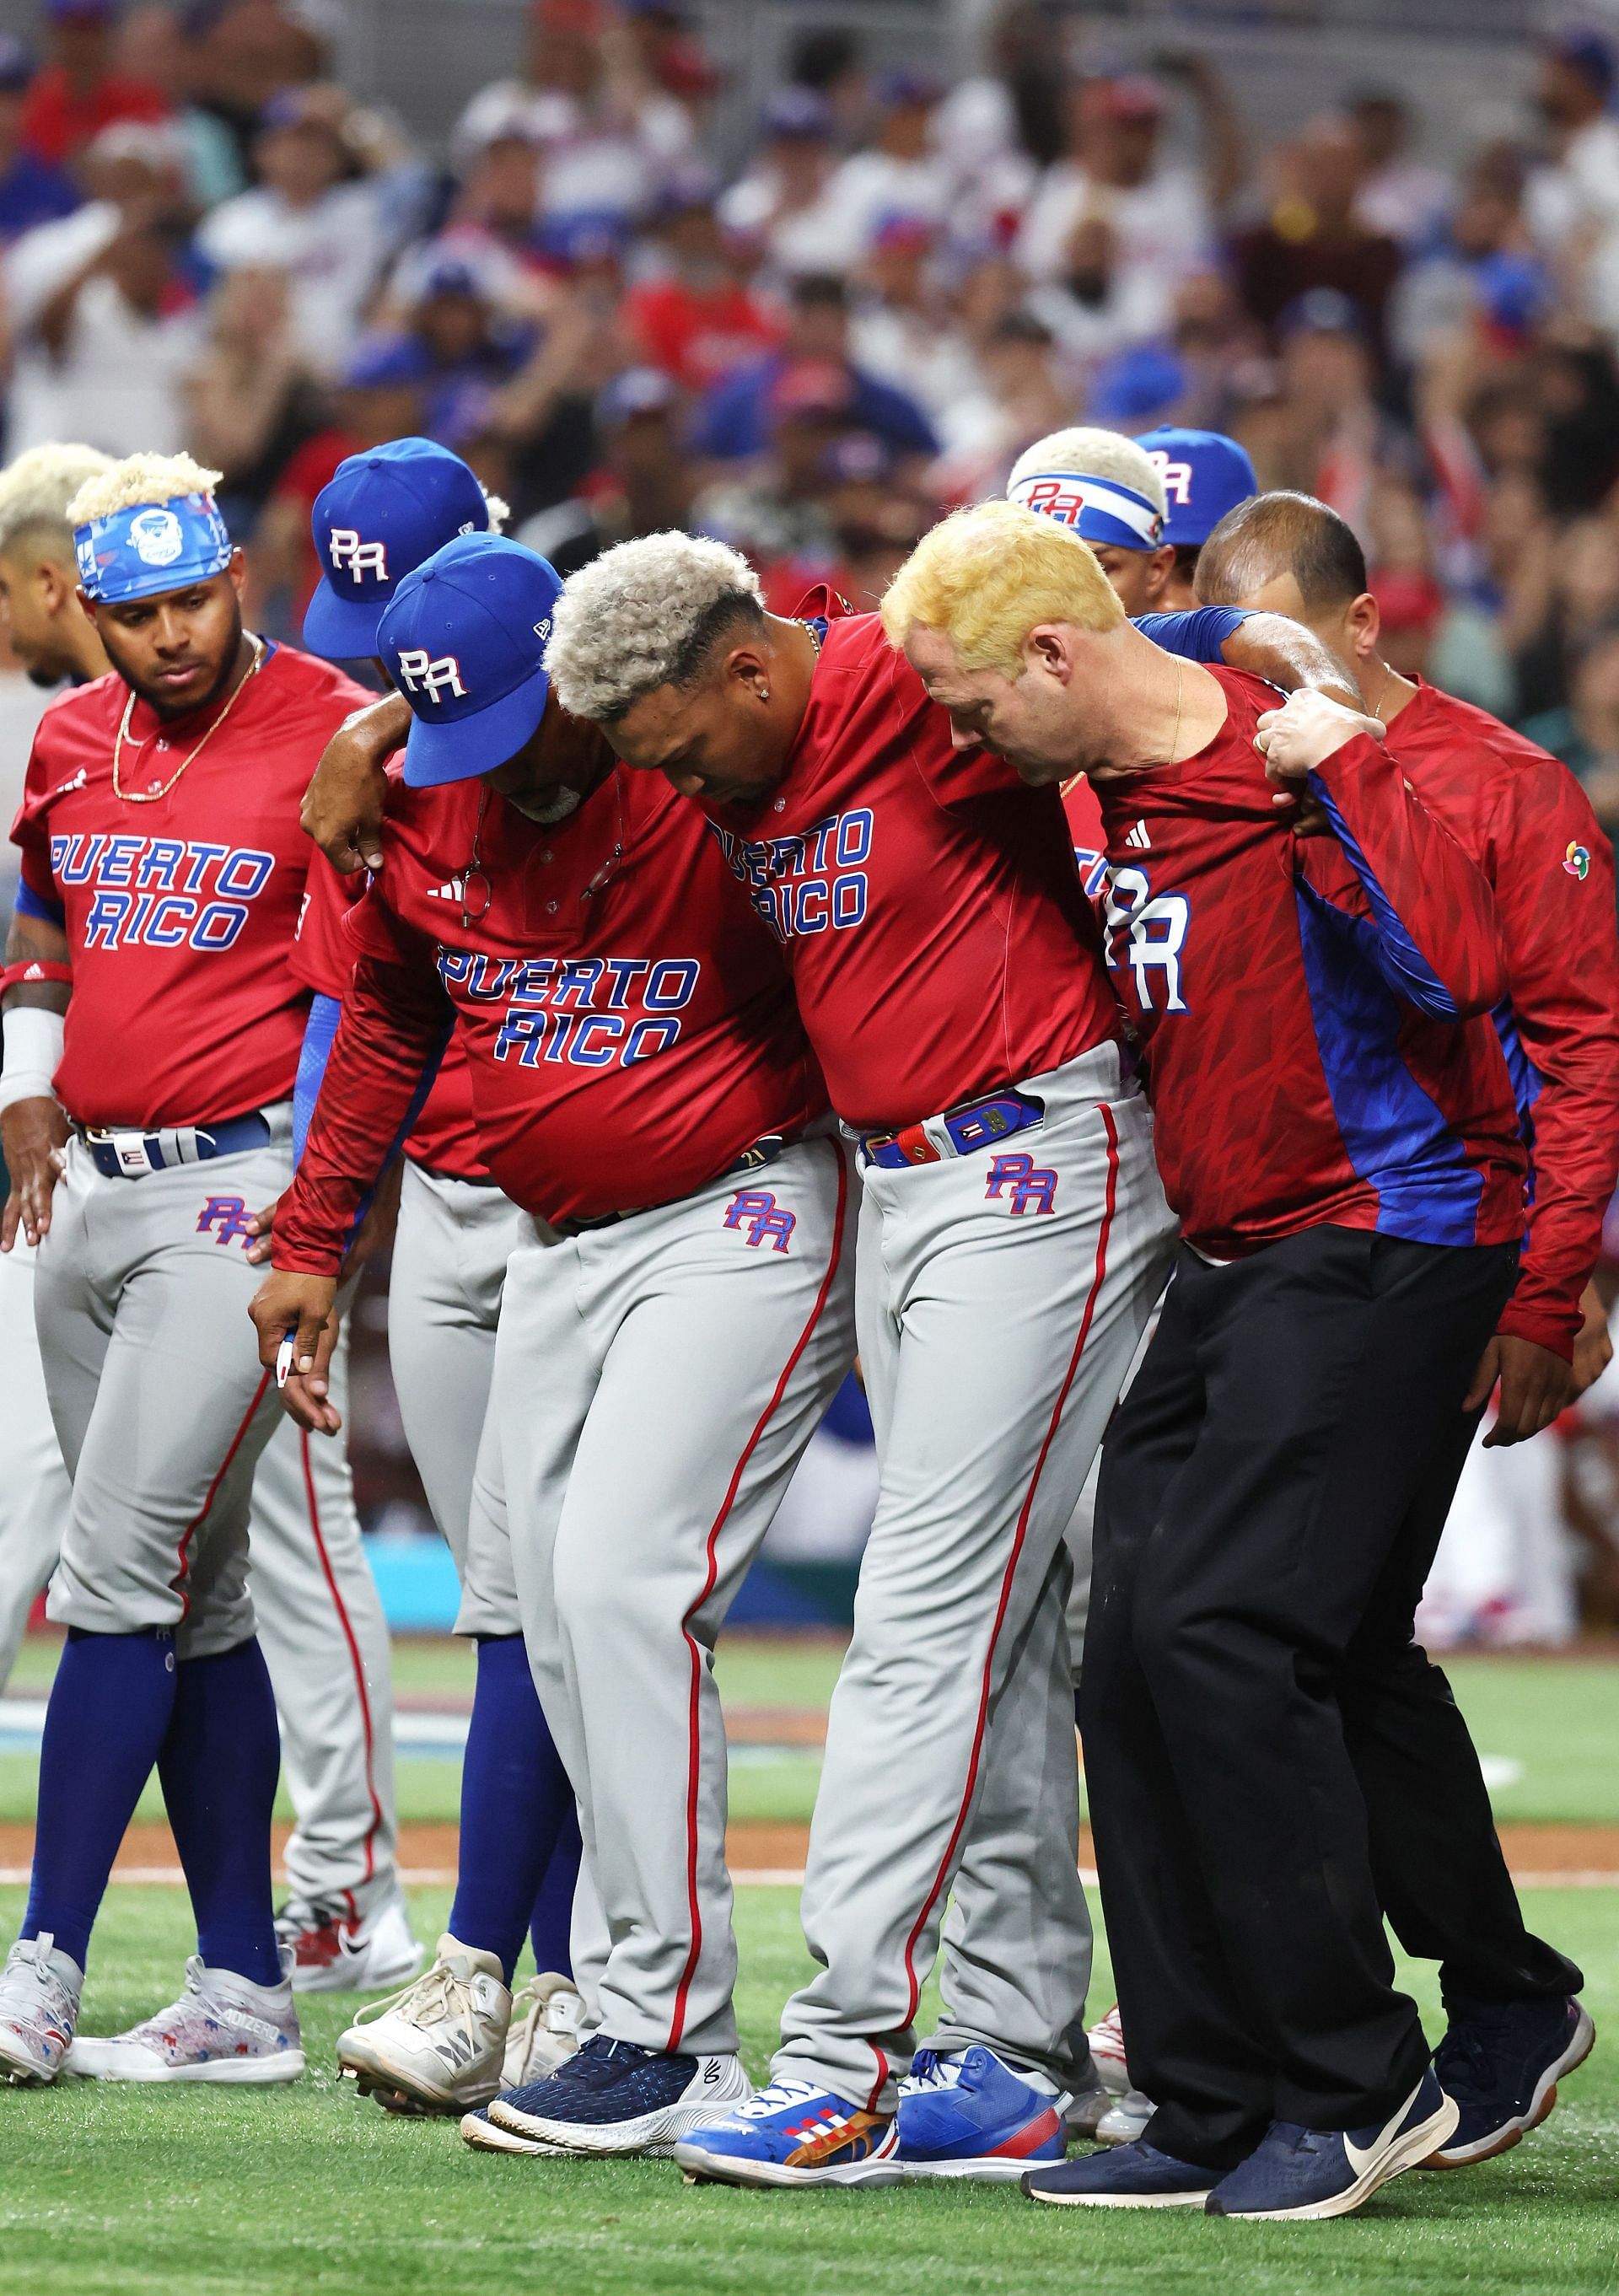 Edwin Diaz injury: What we know so far about Team Puerto Rico and